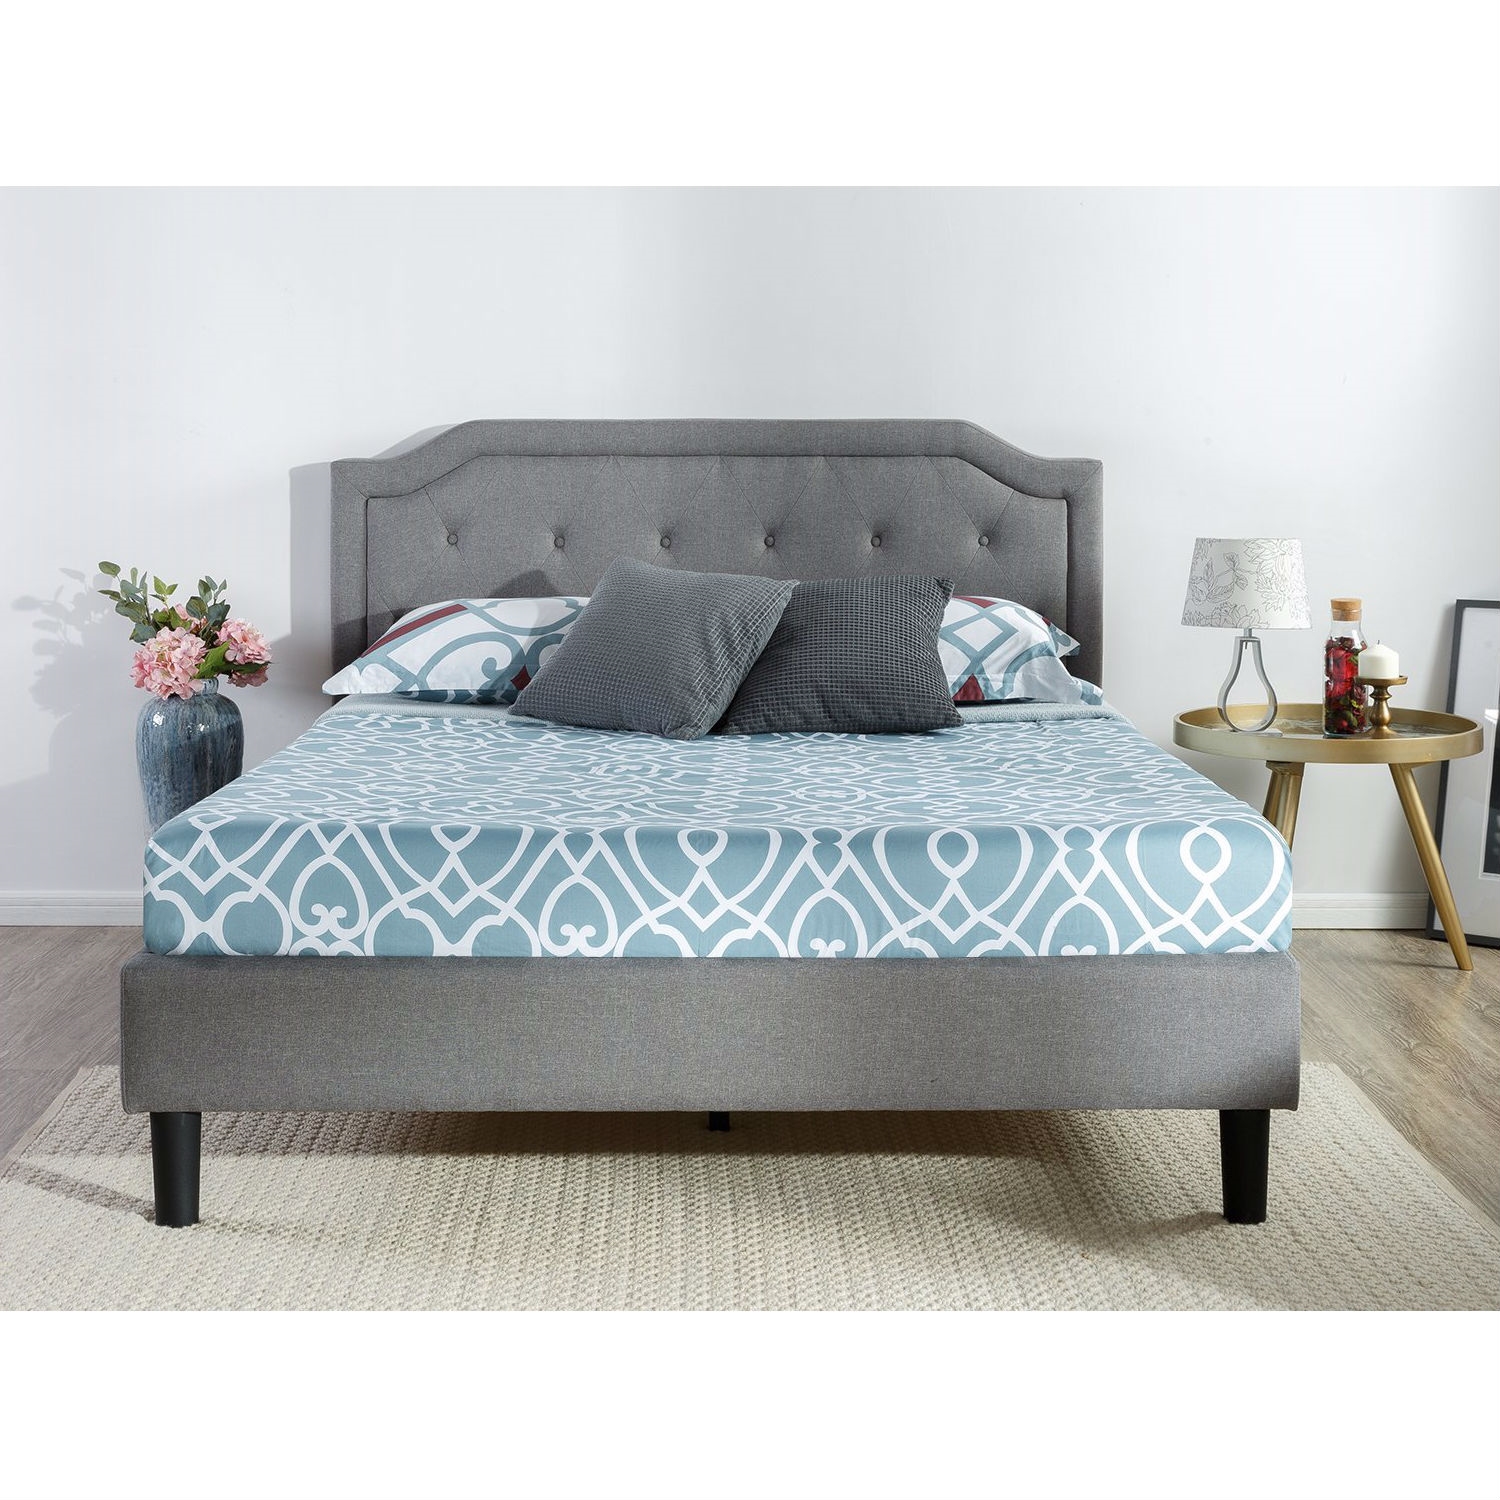 Full size Grey Upholstered Platform Bed with Classic Button Tufted Headboard